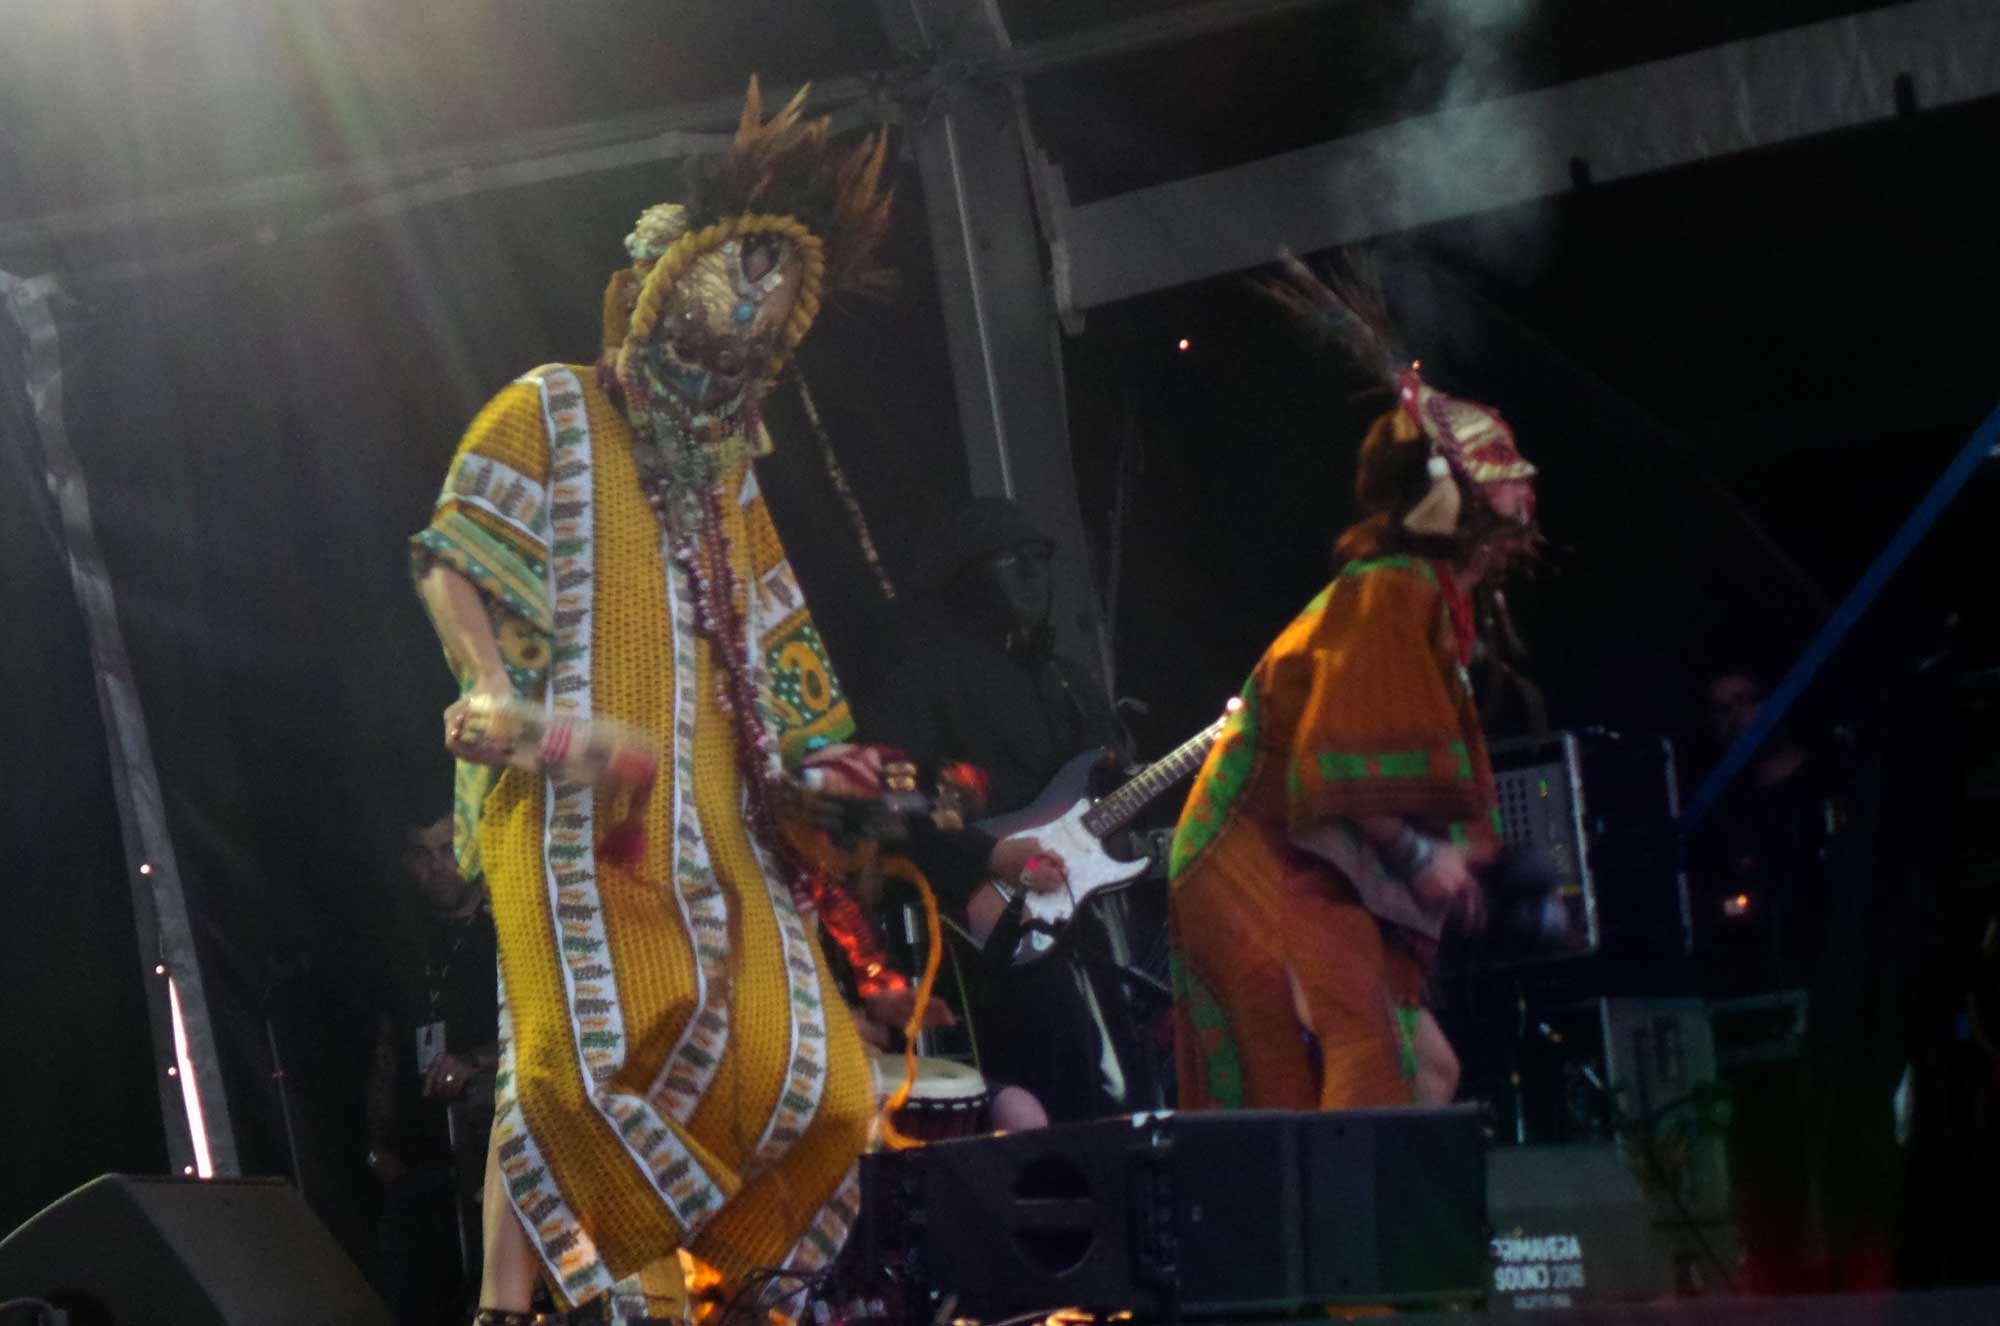 Goat performing in the Primavera Sound 2016's first day